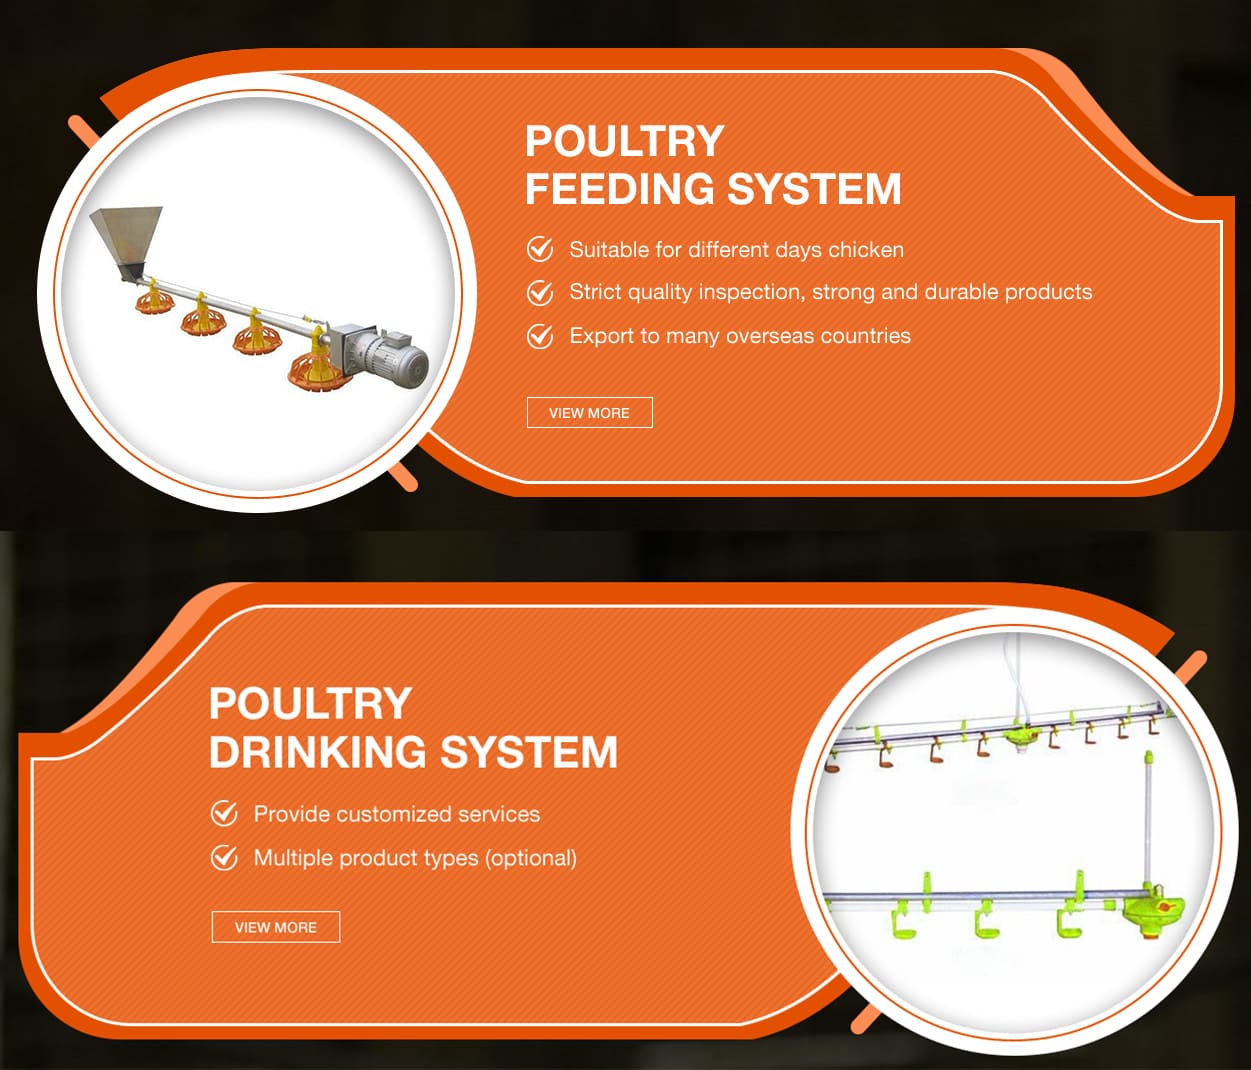 THE IMPORTANCE OF QUALITY POULTRY EQUIPMENT FOR RAISING HEALTHY CHICKENS